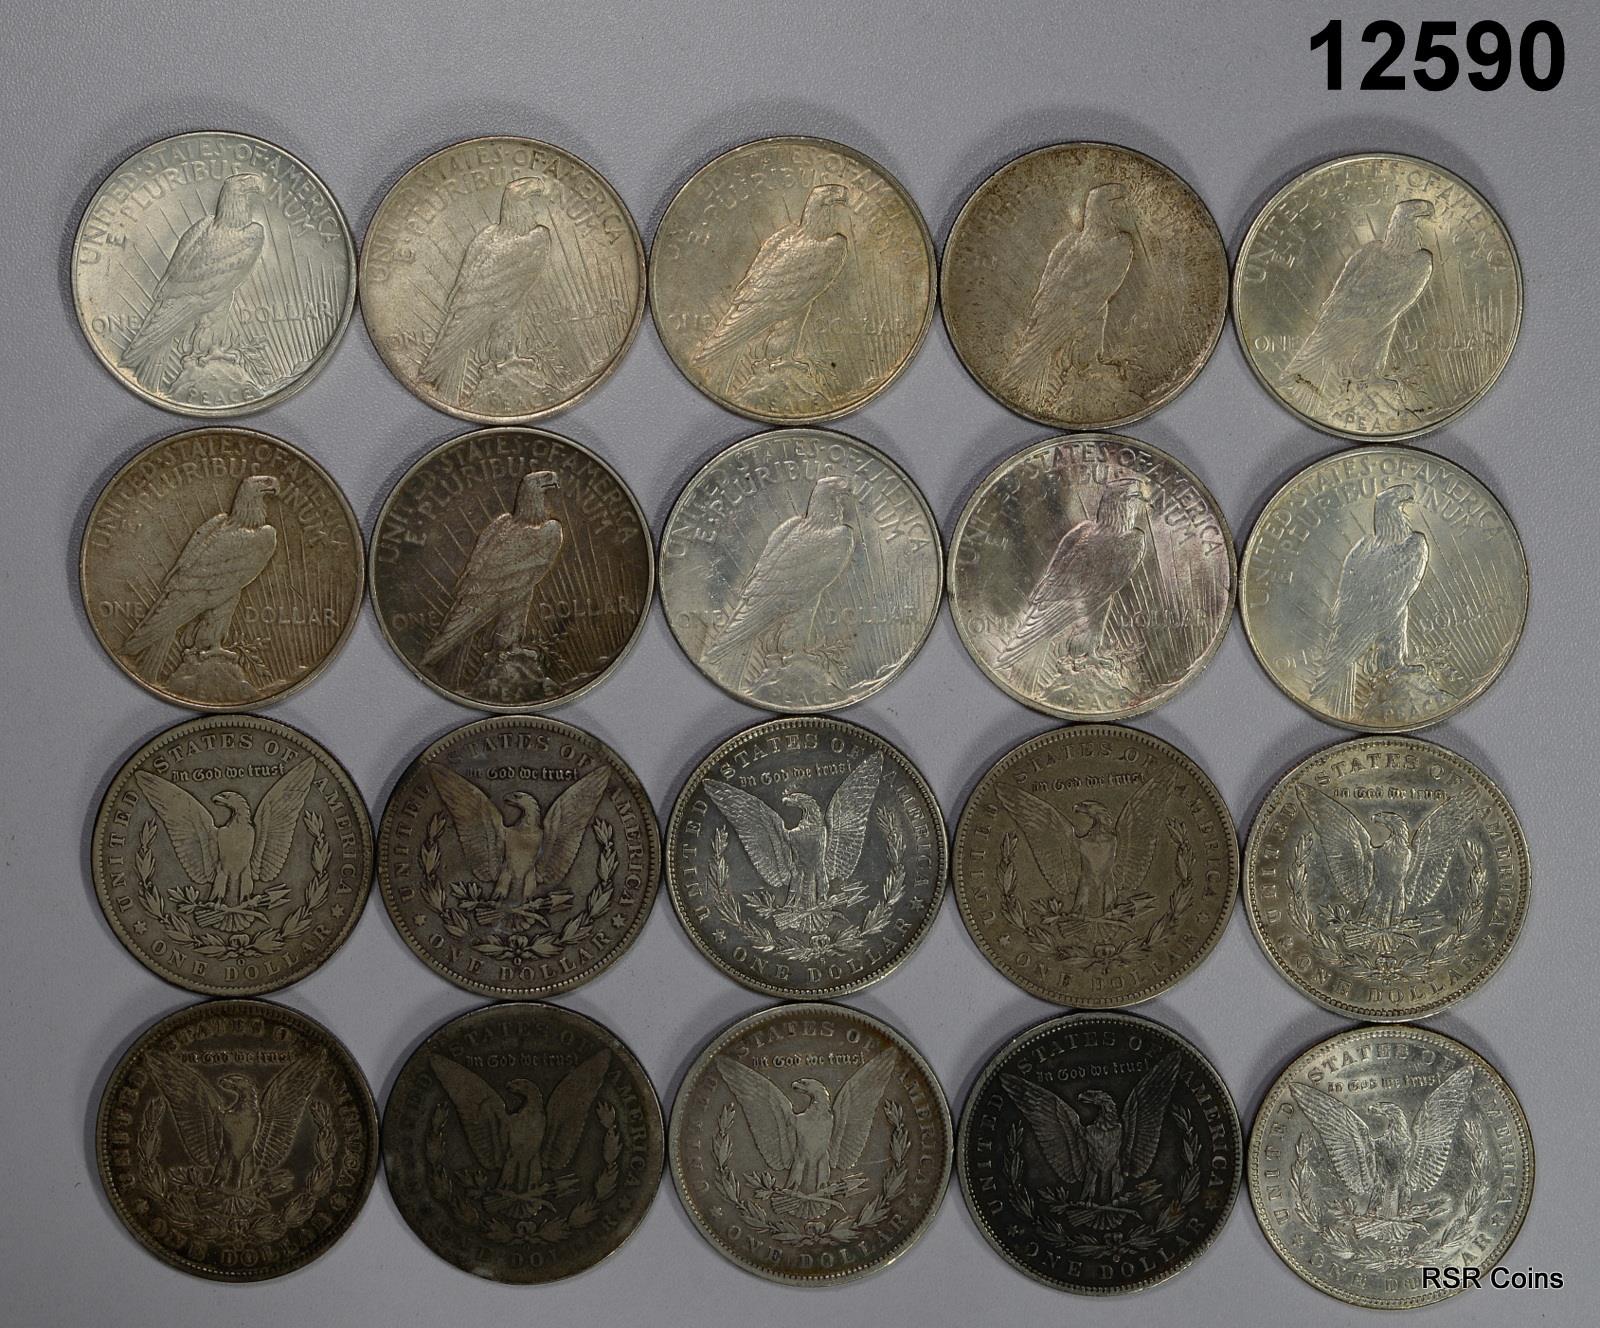 ROLL (10) PRE 21 MORGAN AND (10) PEACE SILVER DOLLARS F-AU SOME CULLS #12590